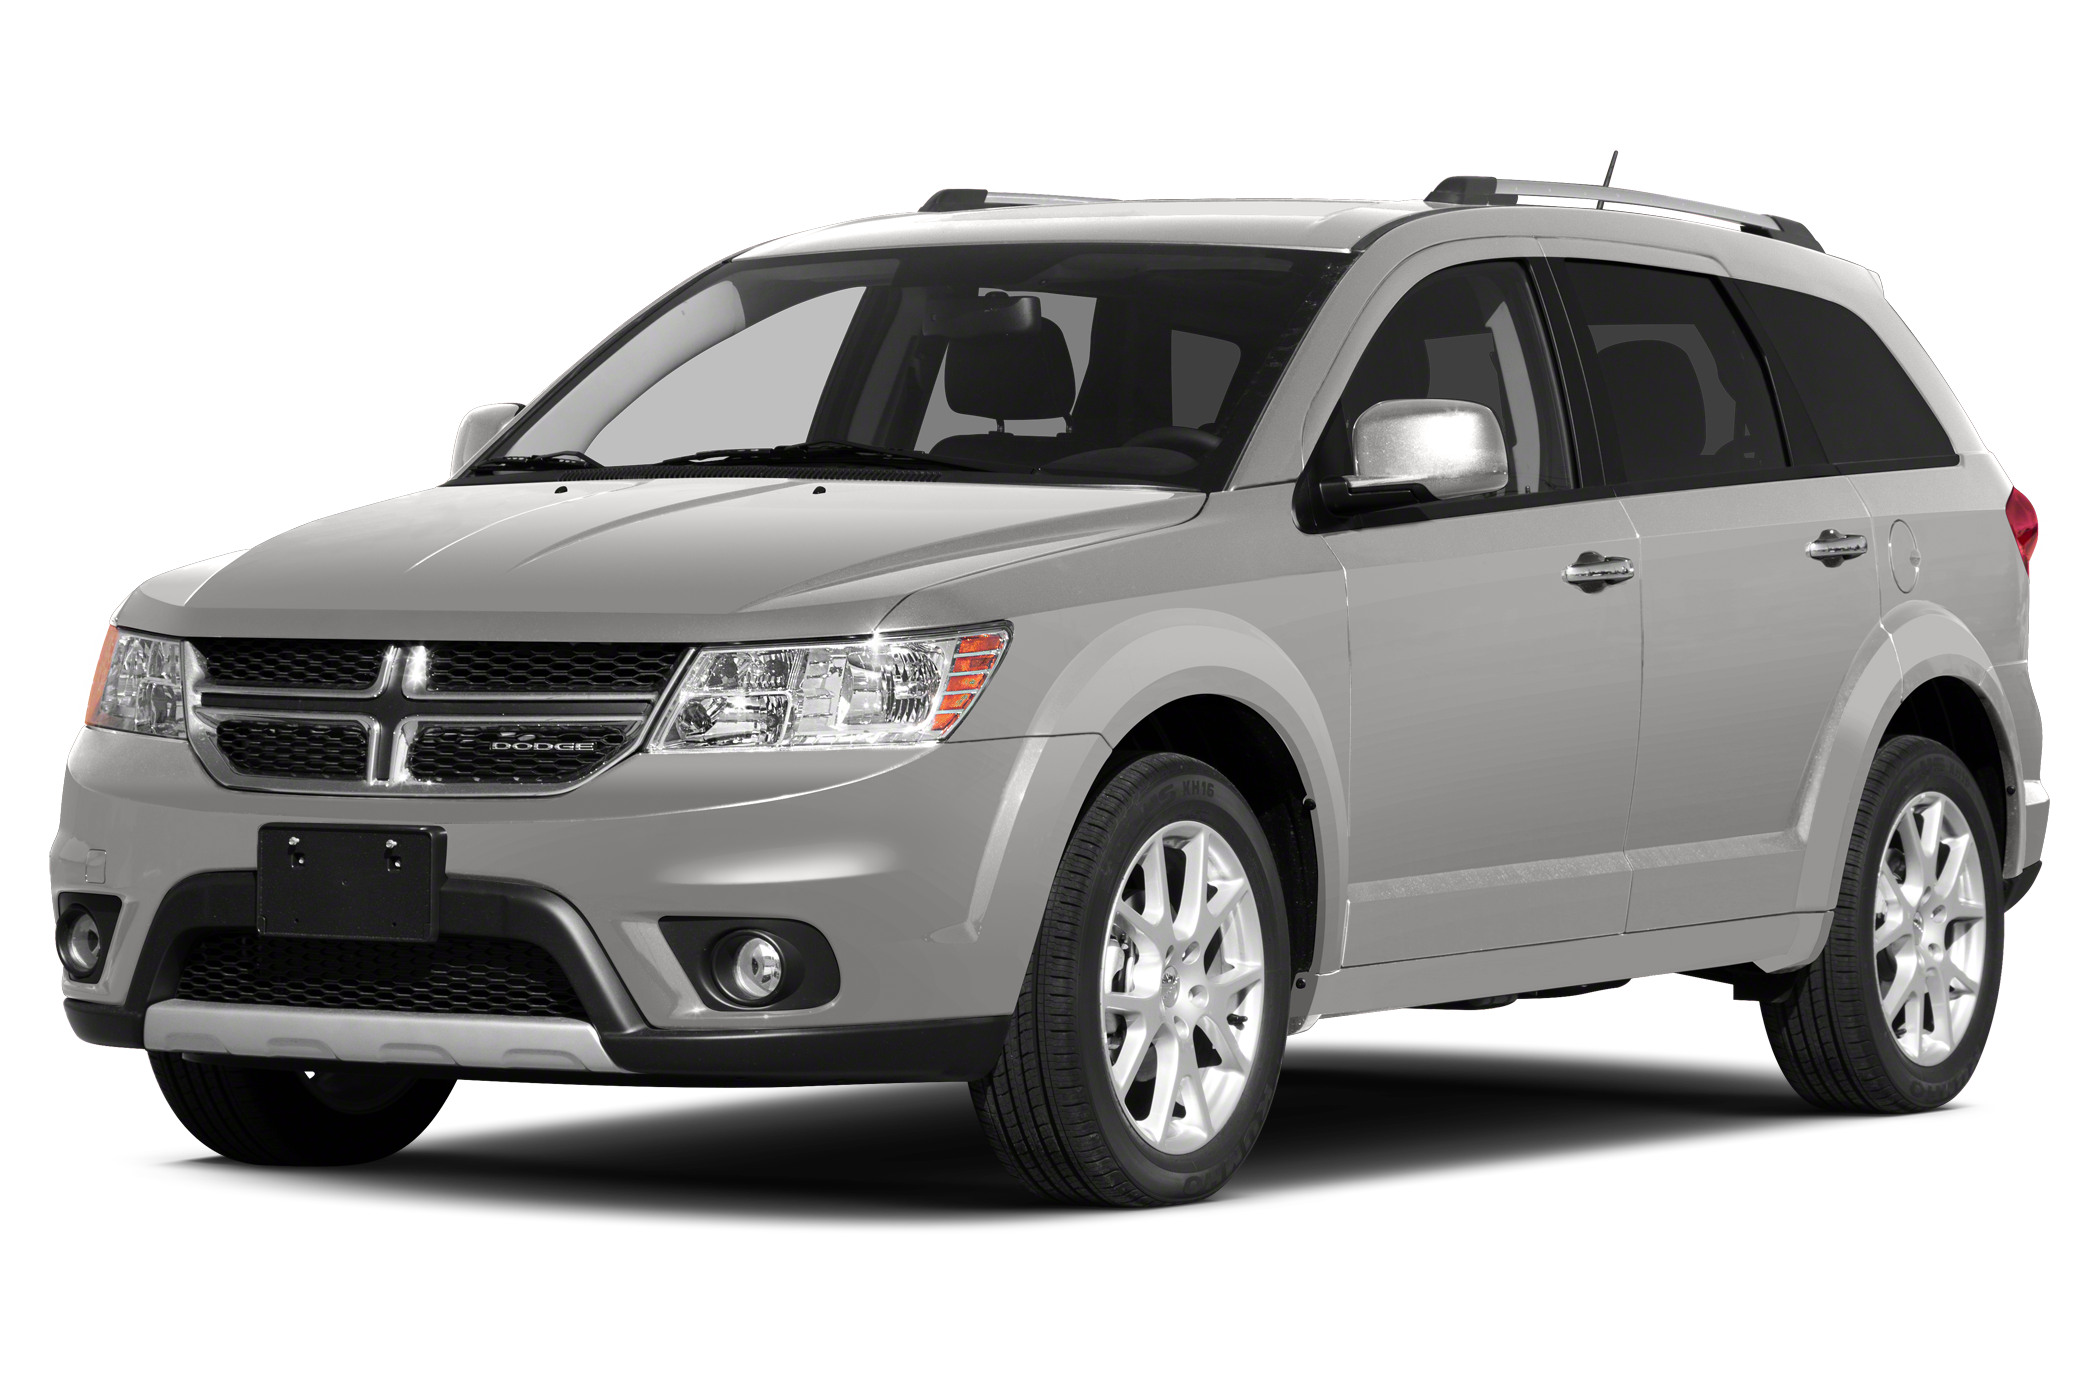 Side view of the 2014 Dodge Journey